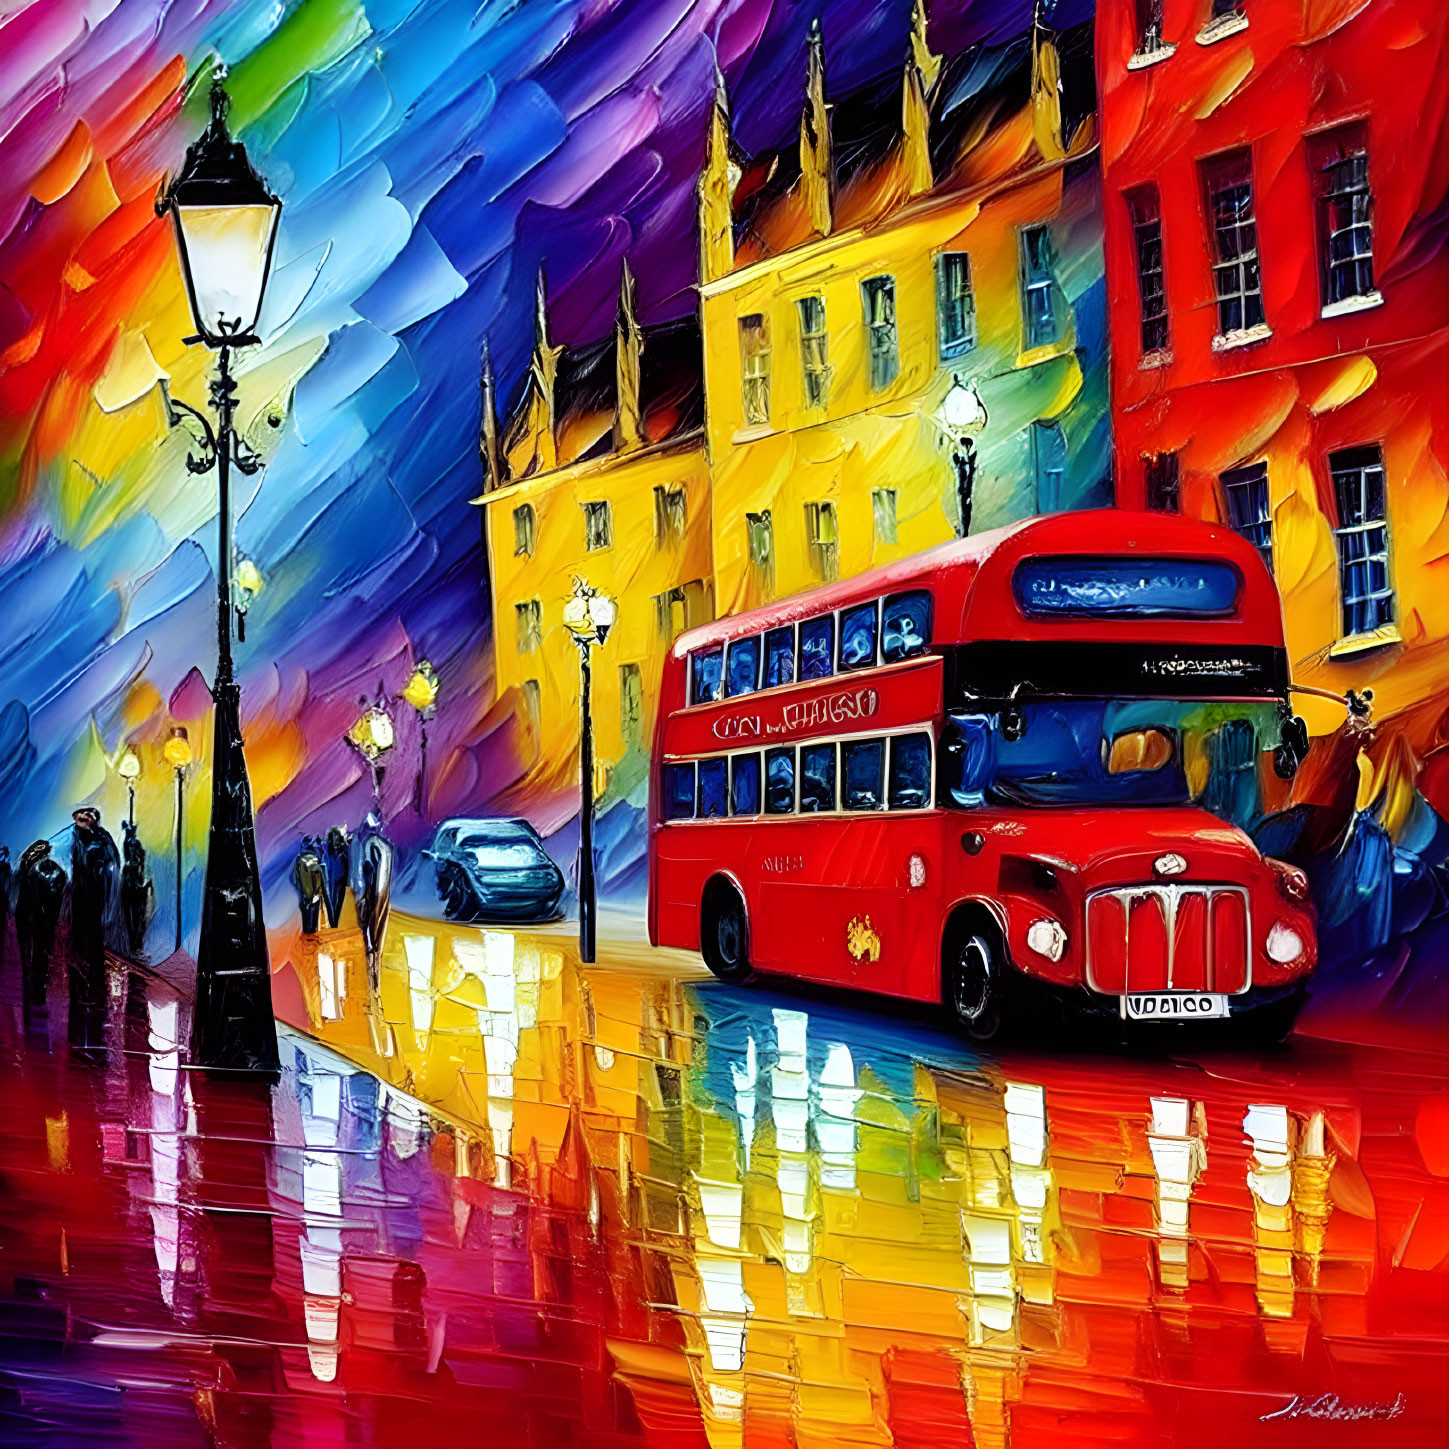 Vibrant painting of red double-decker bus on rainy city street at night